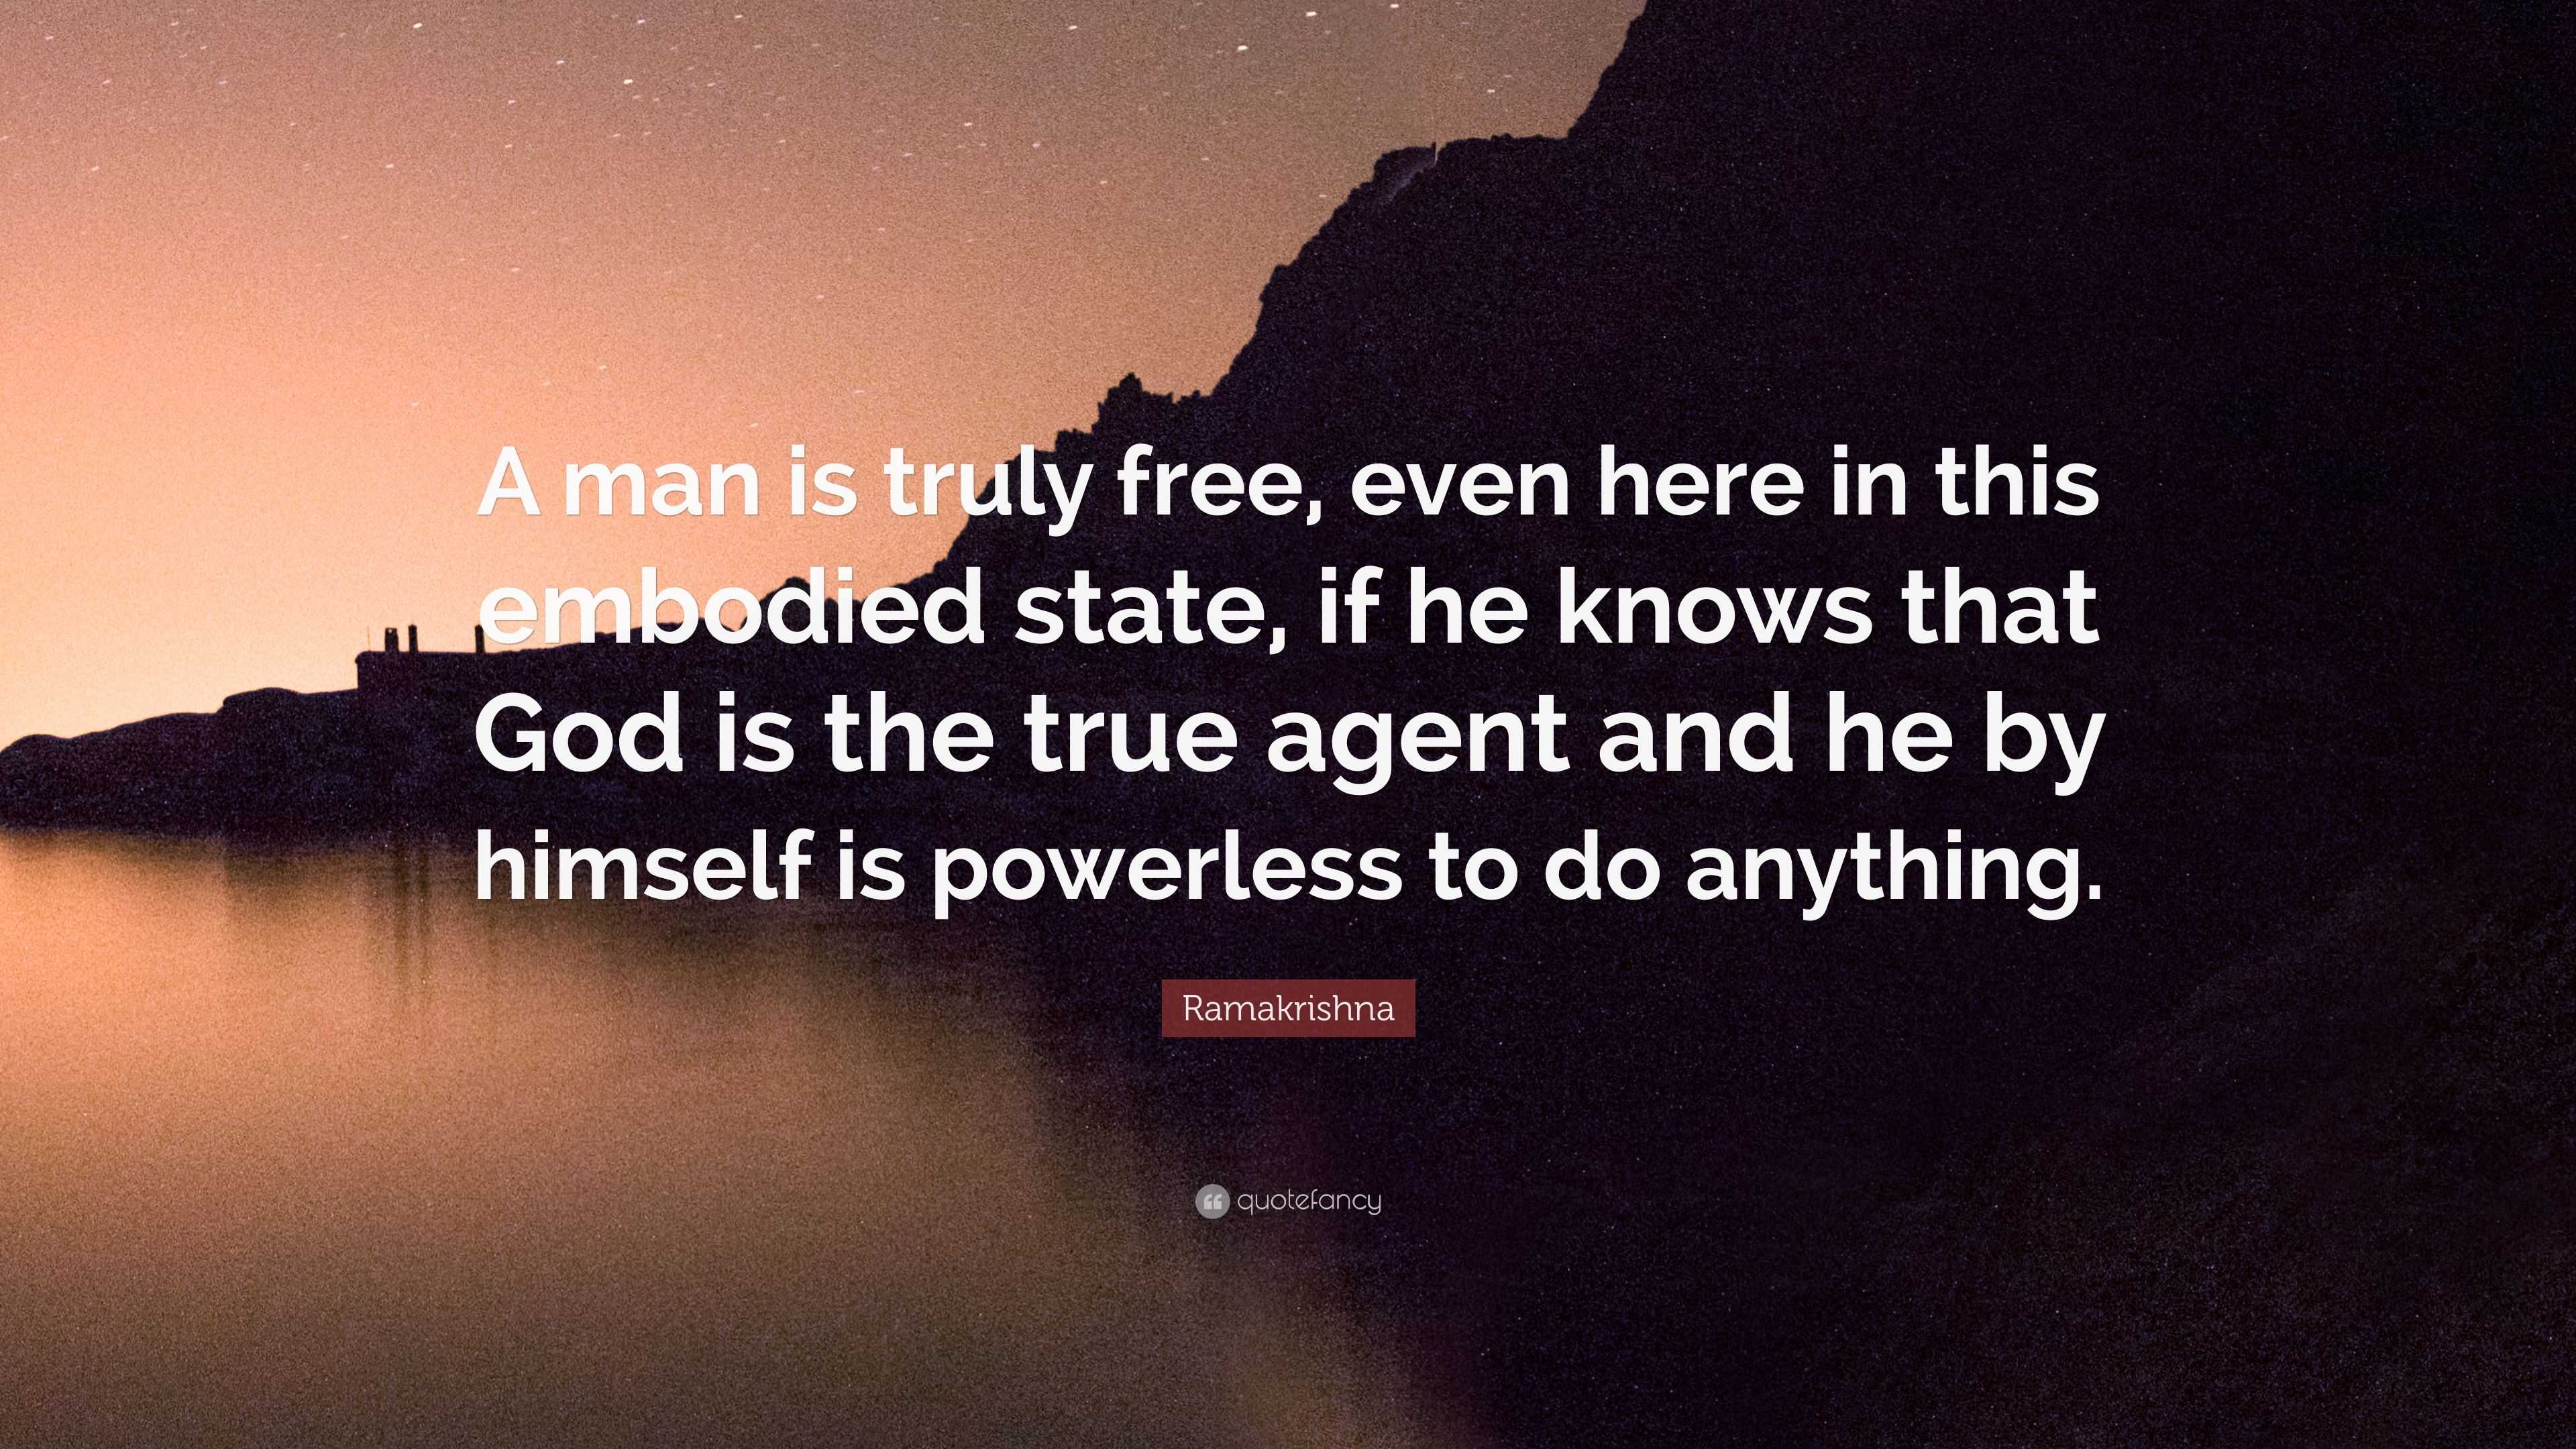 Ramakrishna Quote: “A man is truly free, even here in this embodied ...